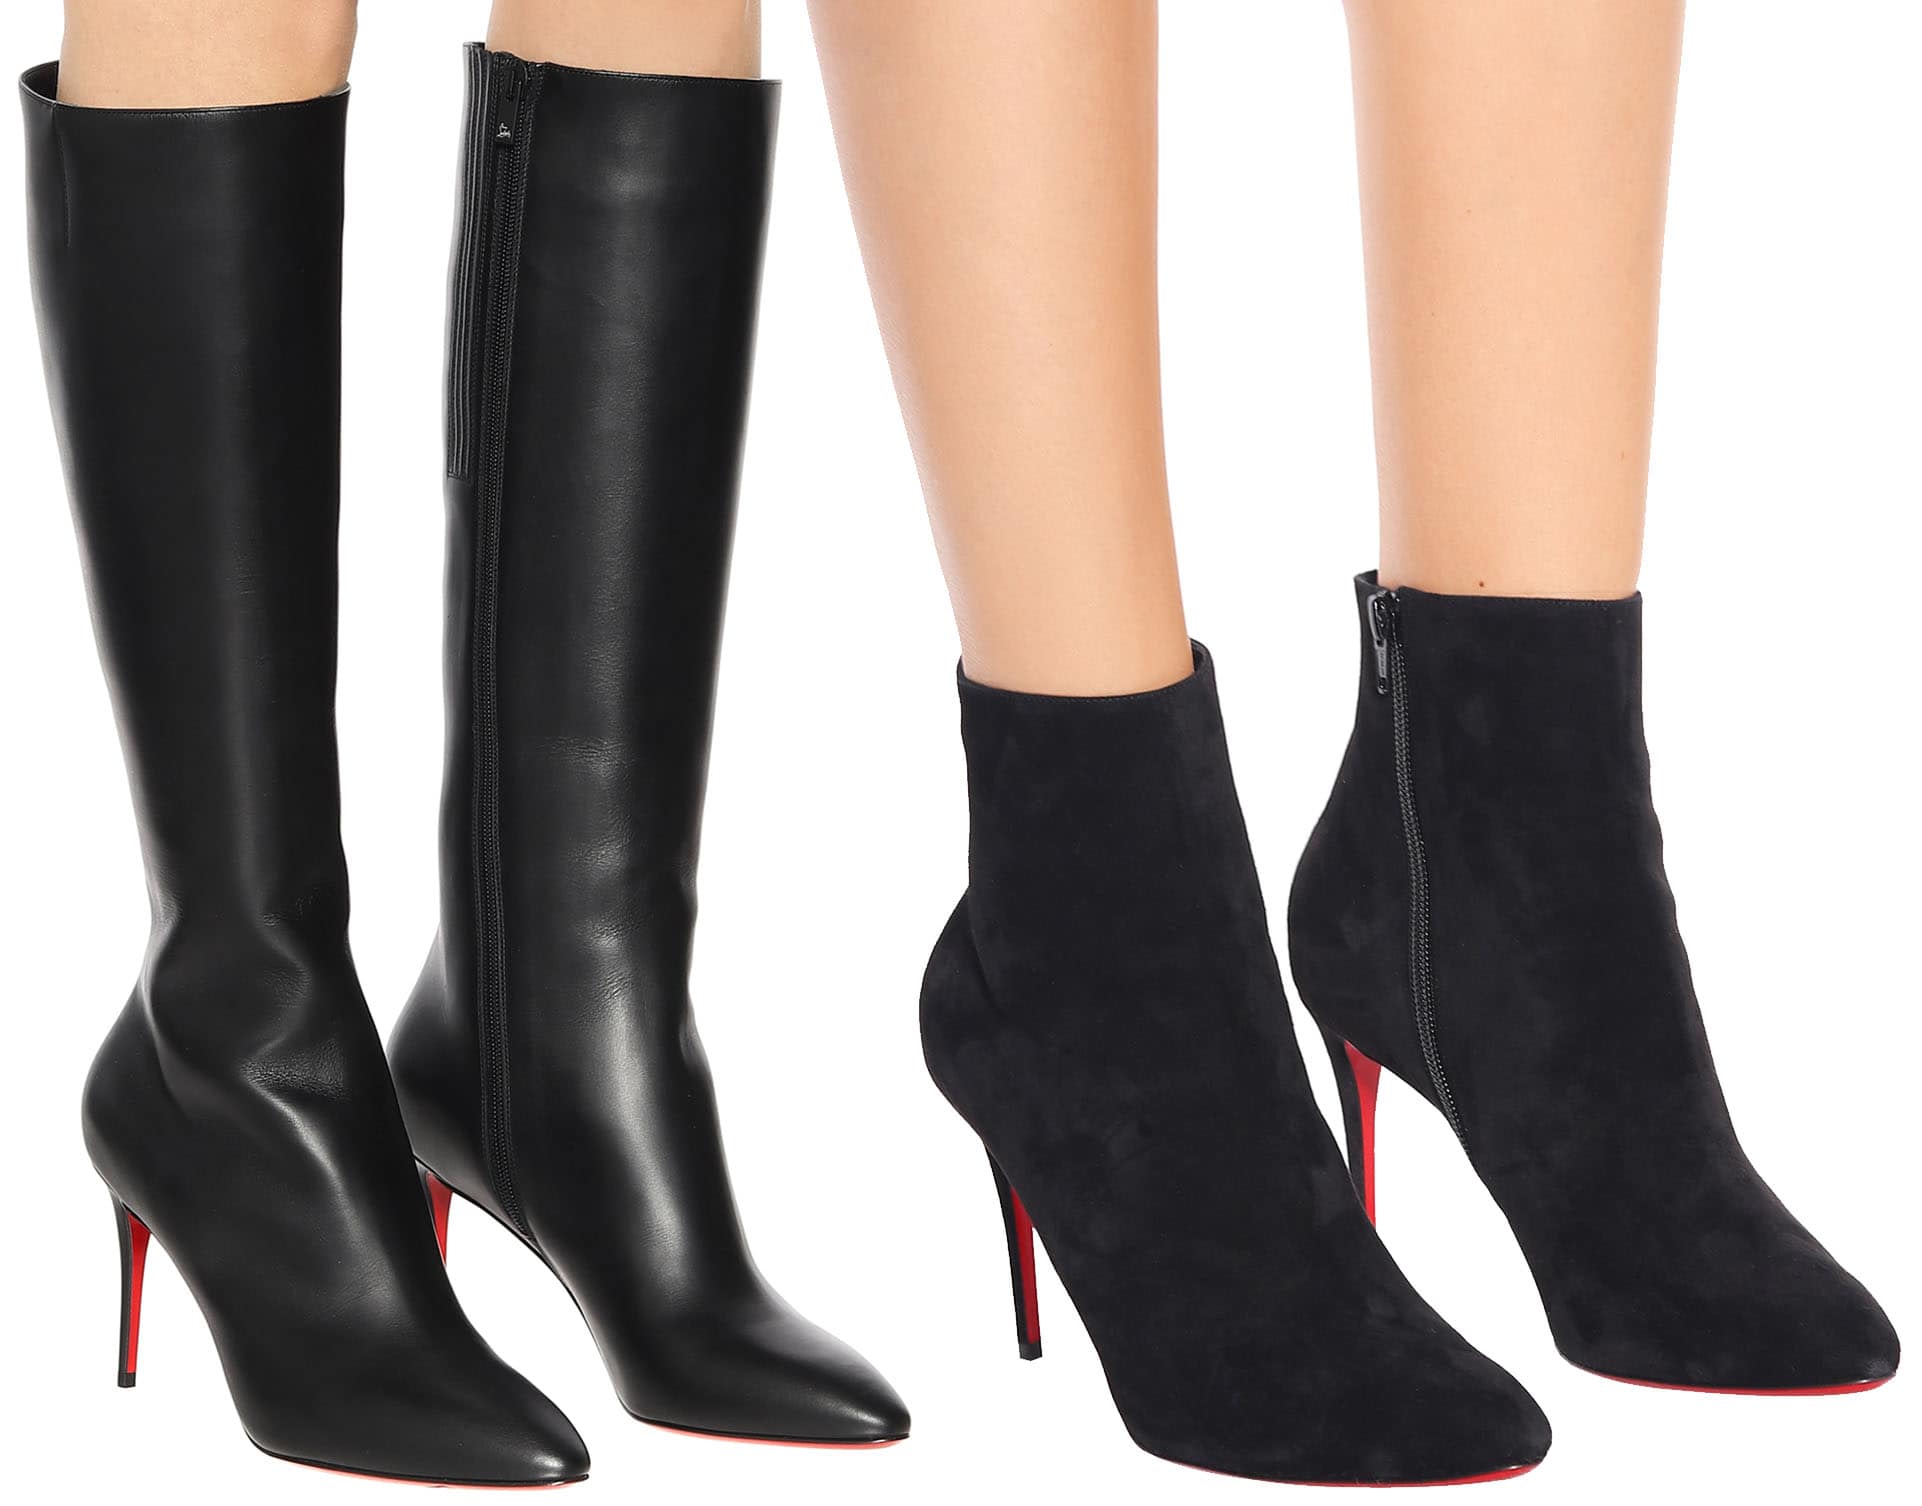 Christian Louboutin's Eloise boot has gained significant popularity, rivaling the timeless appeal of the classic pump silhouette, and both styles feature the same comfortable 85mm heels, offering a stylish choice for any outfit or occasion